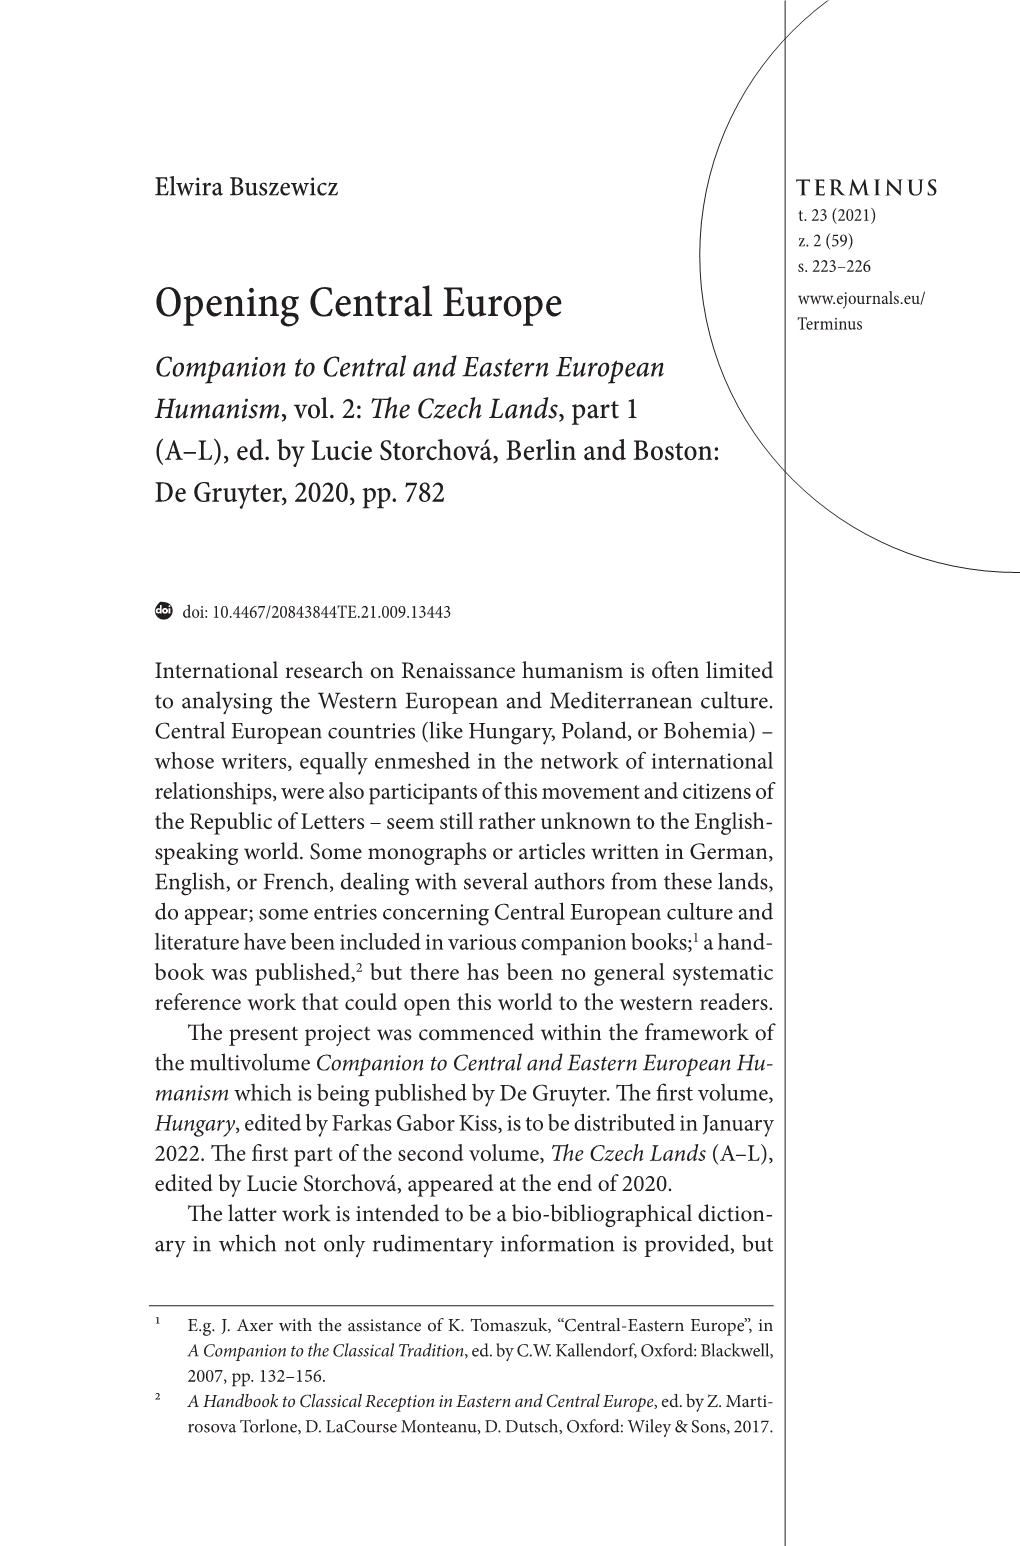 Opening Central Europe Companion to Central and Eastern European Humanism, Vol. 2: the Czech Lands, Part 1 (A–L), Ed. by Lucie